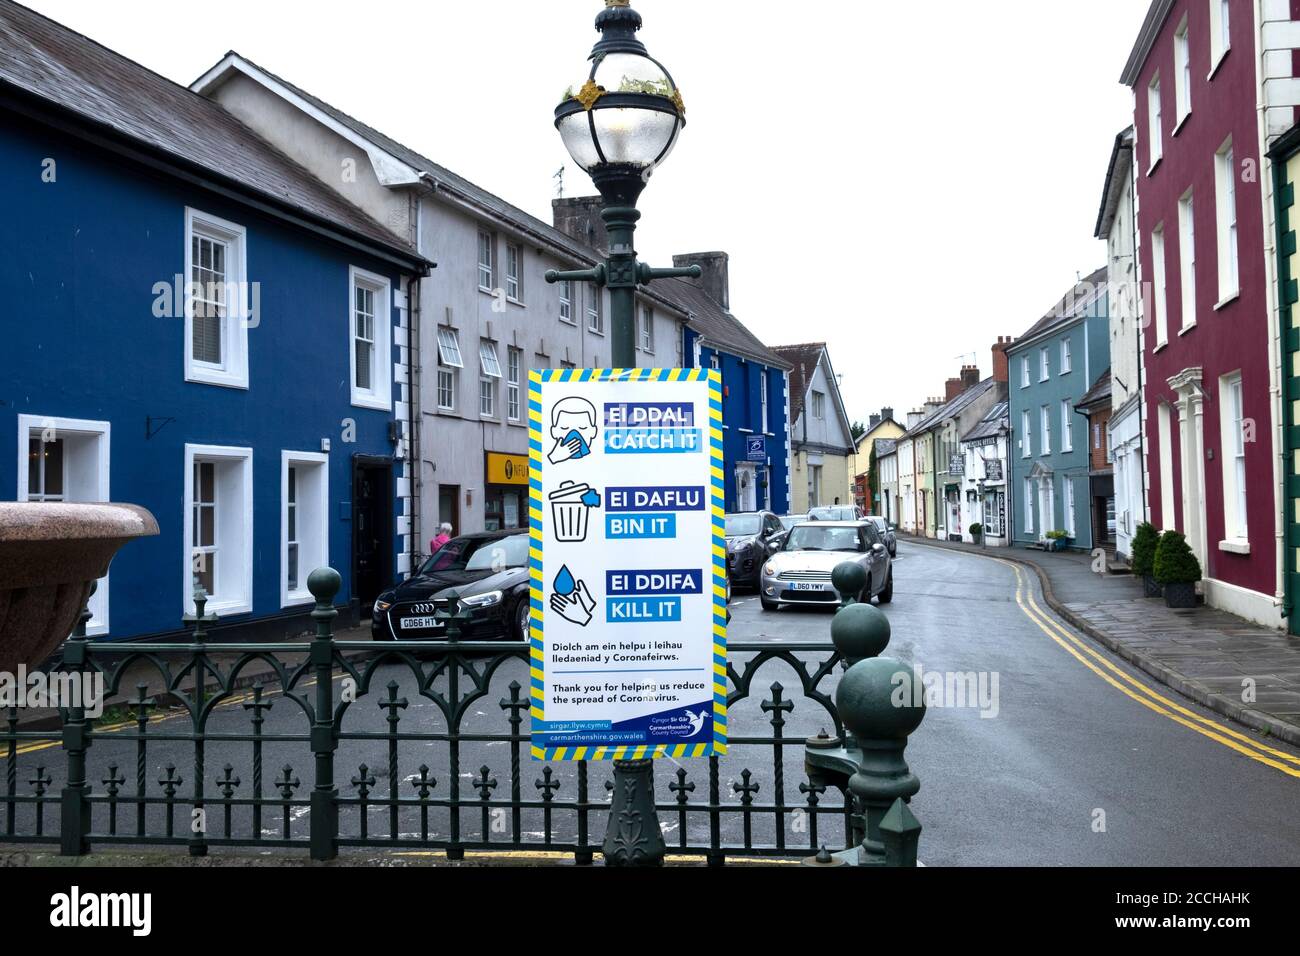 Bilingual Welsh English sign describing how to reduce the spread of Coronavirus in the town centre Llandovery Carmarthenshire Wales UK    KATHY DEWITT Stock Photo